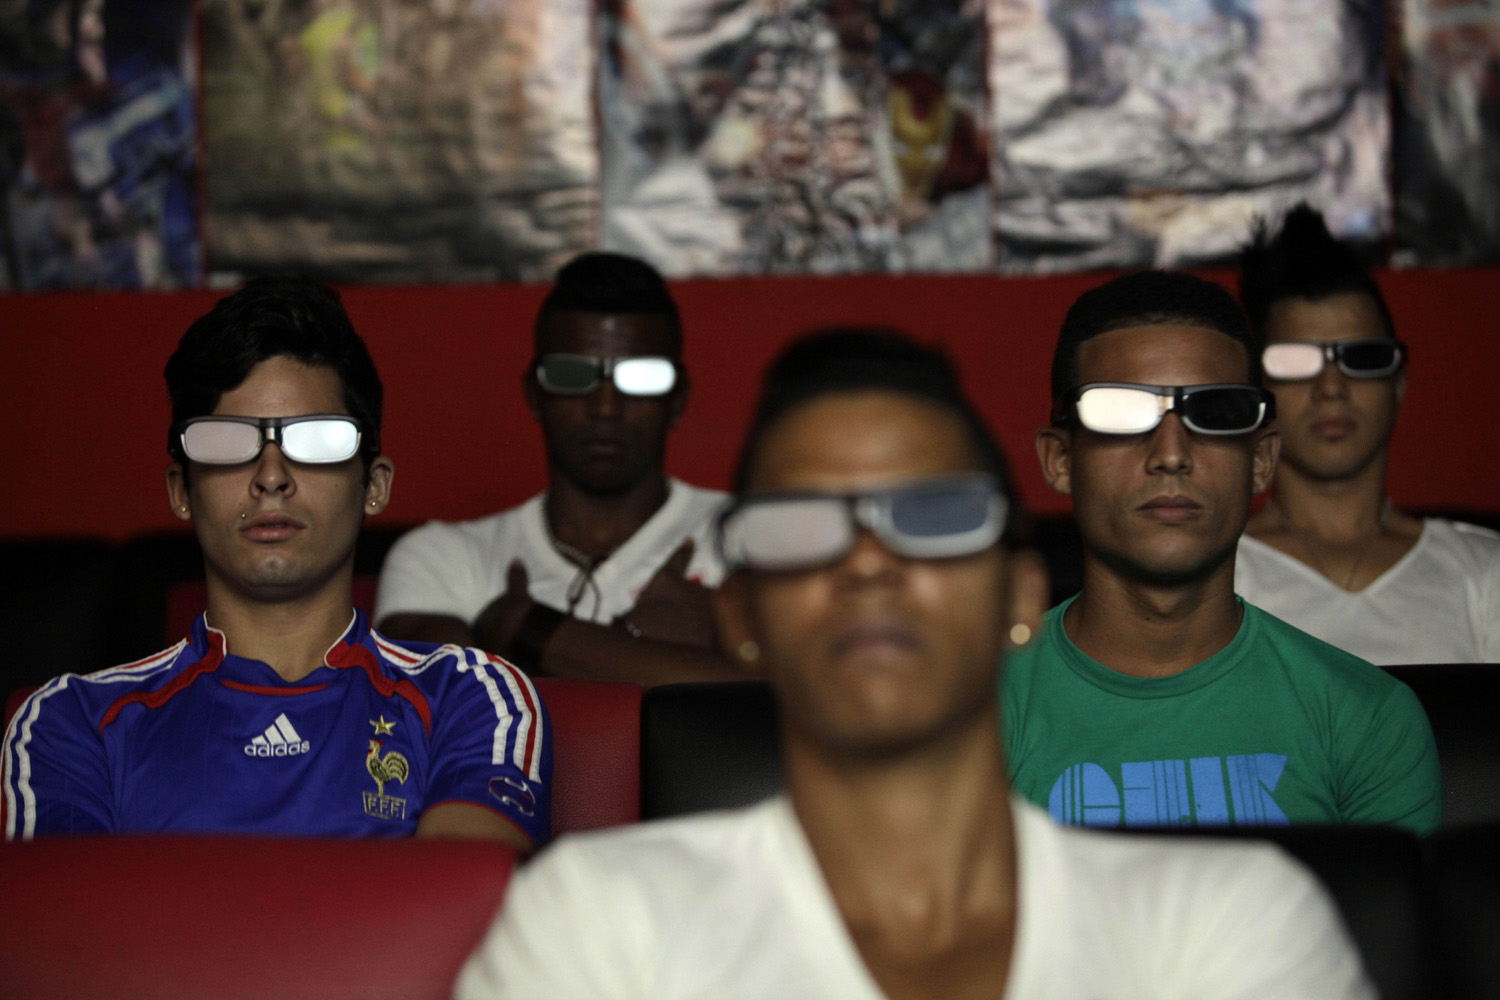 Oct. 28, 2013. People watch a 3D movie at a private movie theater in Havana, Cuba.